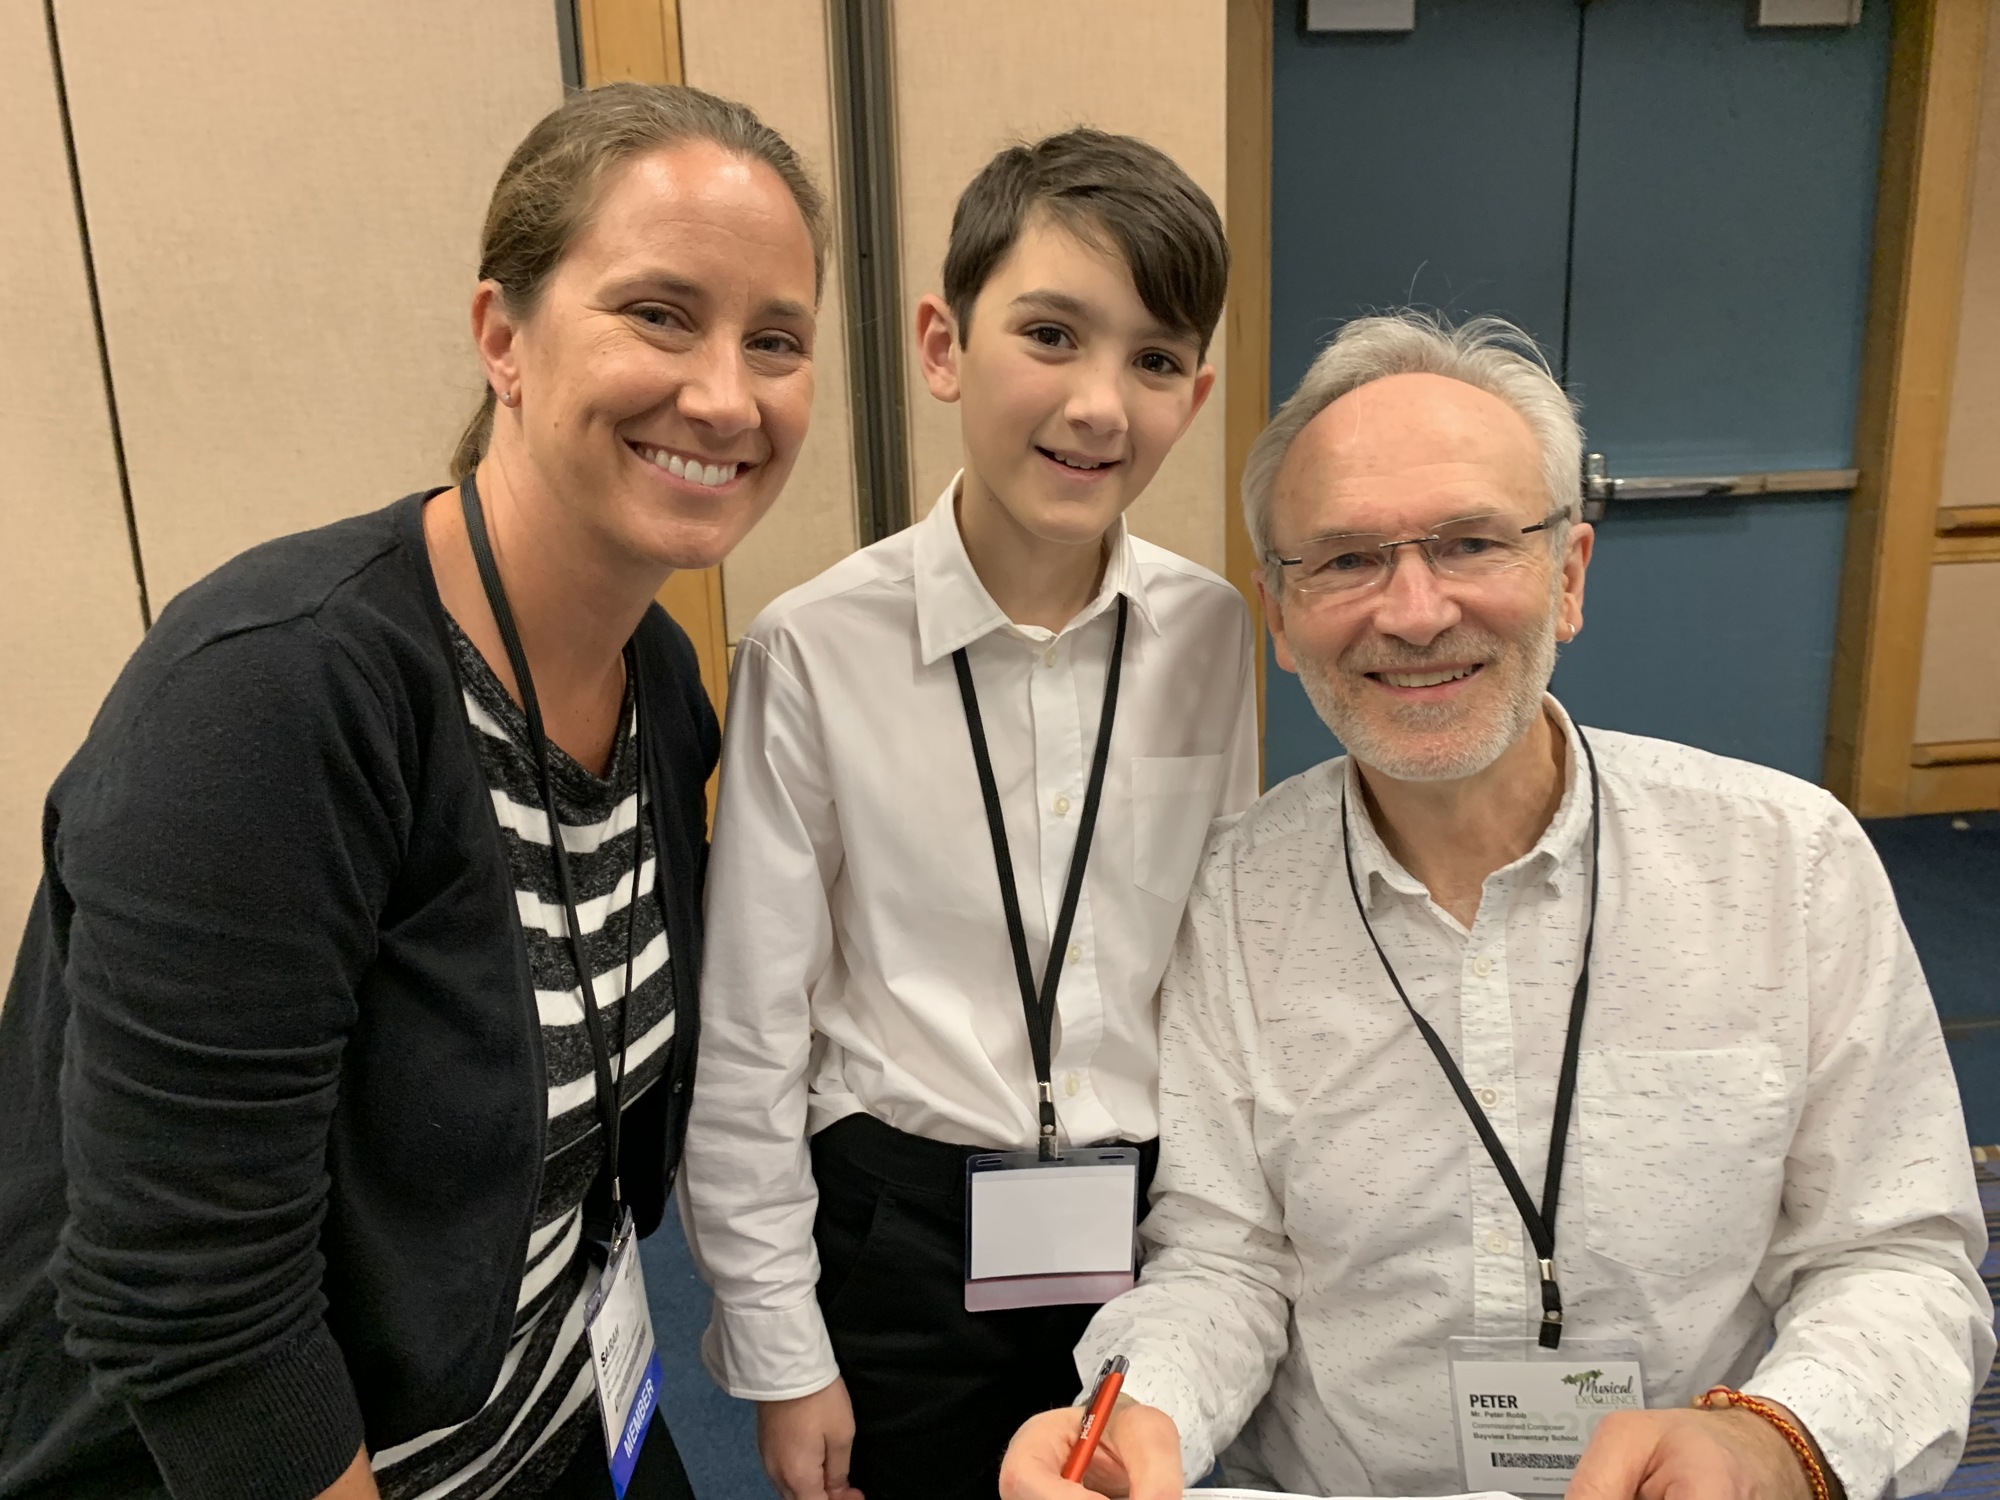 Osceola Elementary School music teacher Sarah Johns, Jack Simpson at Composer Peter Robb  at the Florida Elementary Music Teacher’s Association’s yearly convention in Tampa in early January. Courtesy photo